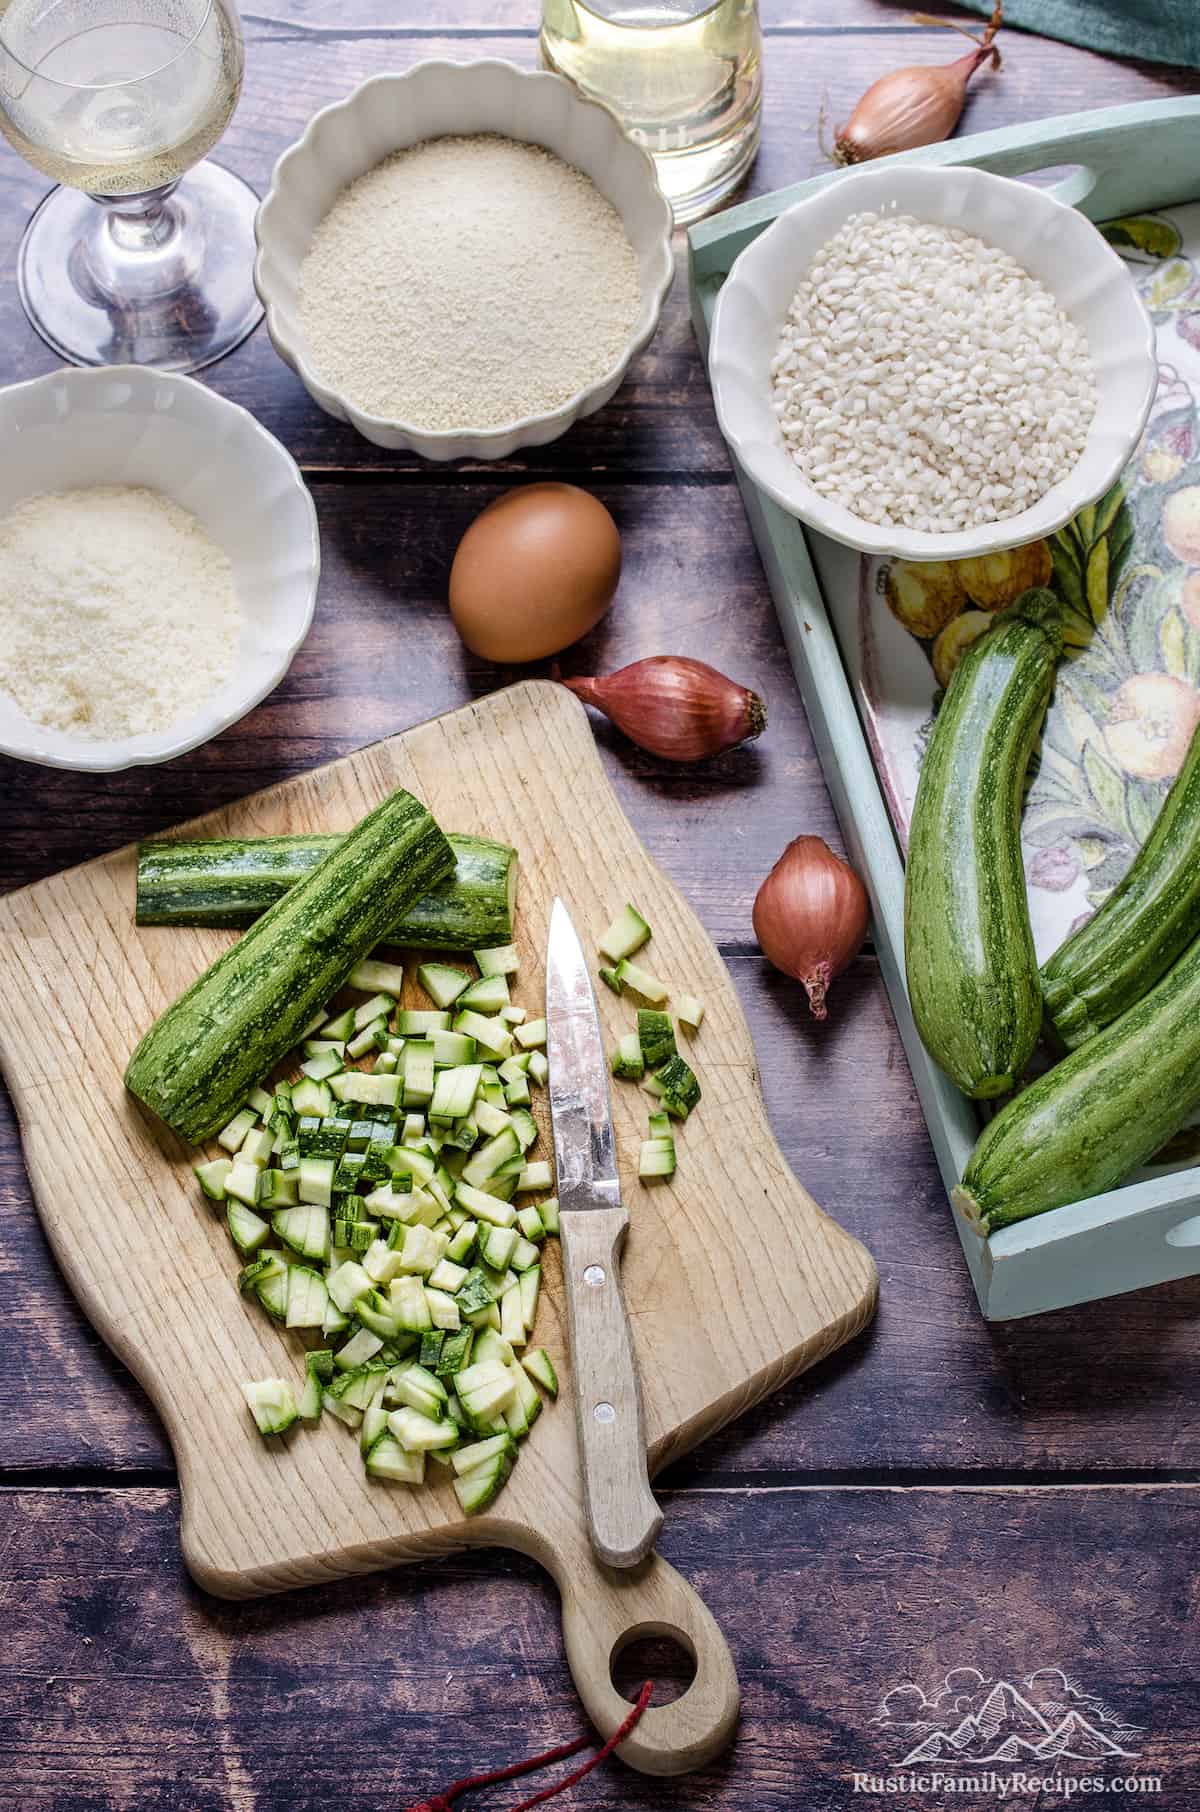 Diced zucchini on a wooden cutting board surrounded by the ingredients for homemade arancini.